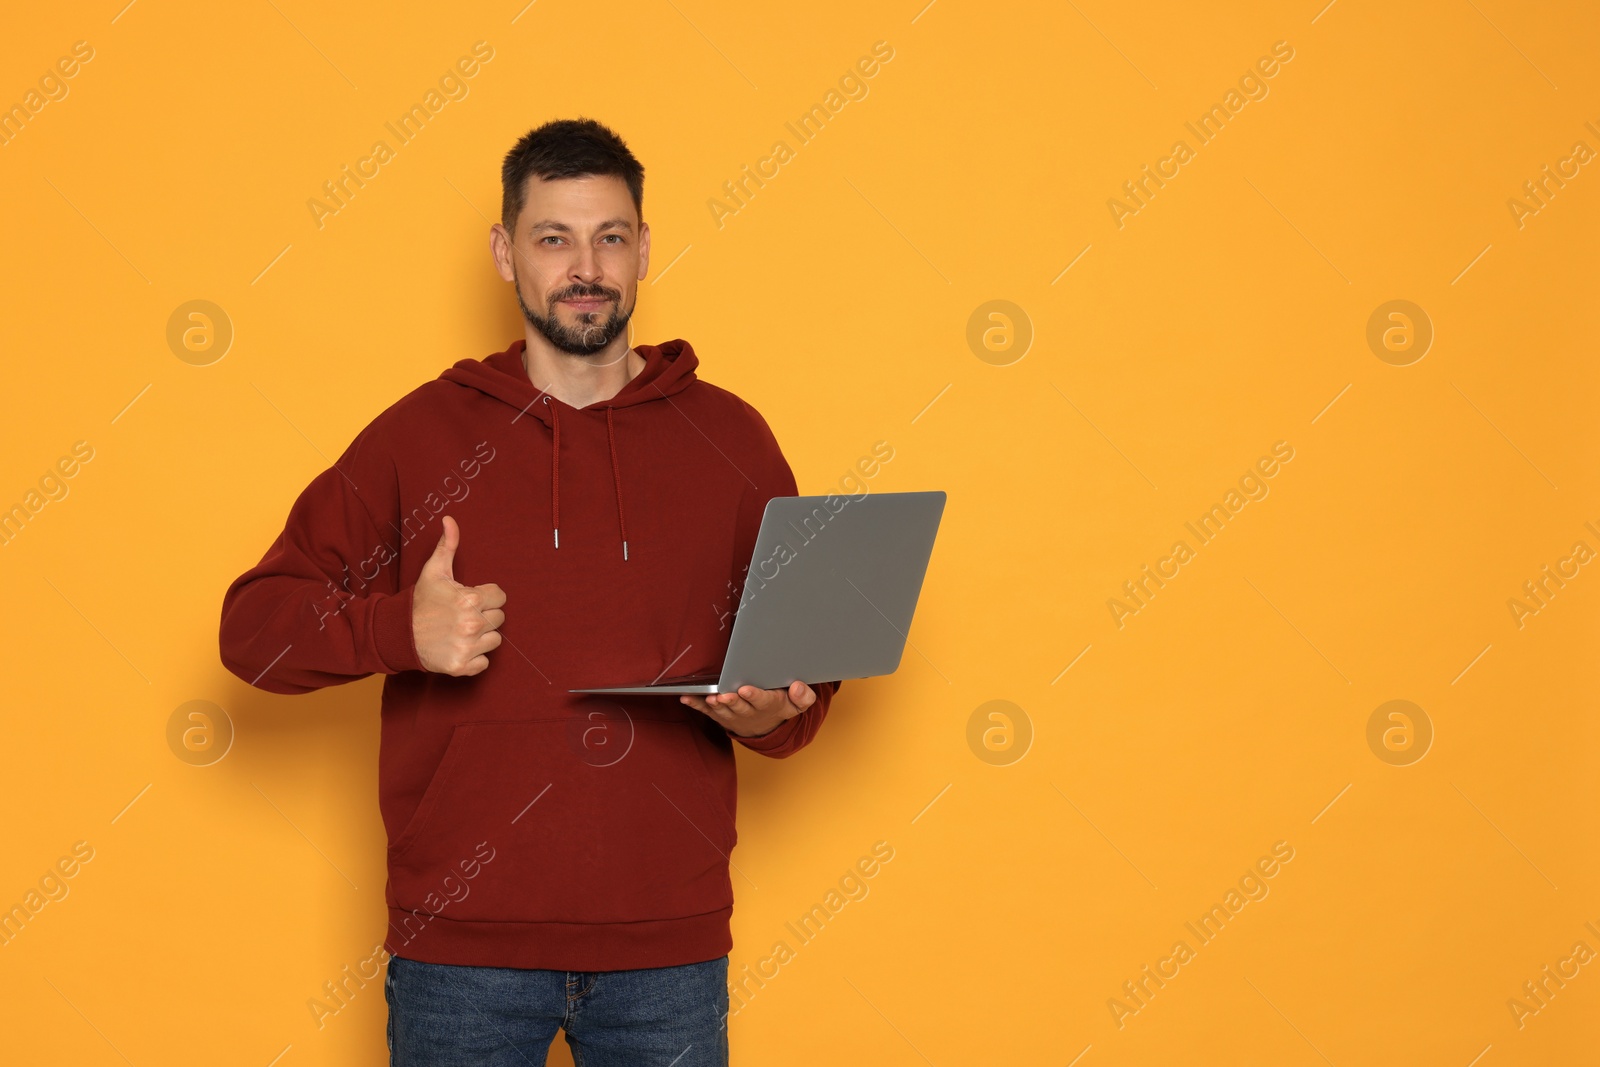 Photo of Handsome man with laptop showing thumbs up on orange background. Space for text